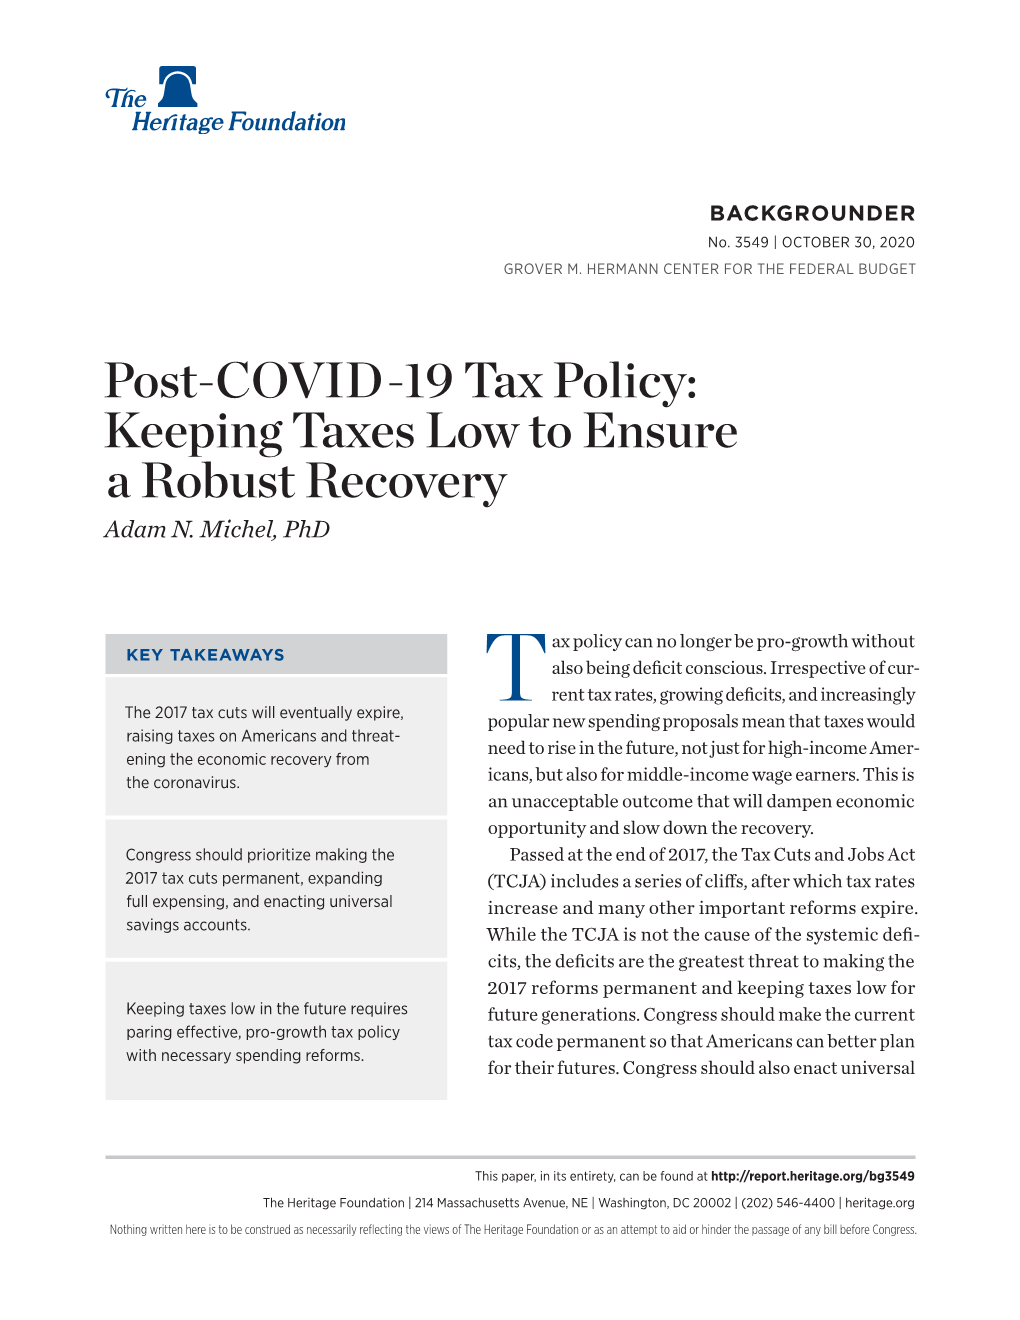 Post-COVID-19 Tax Policy: Keeping Taxes Low to Ensure a Robust Recovery Adam N